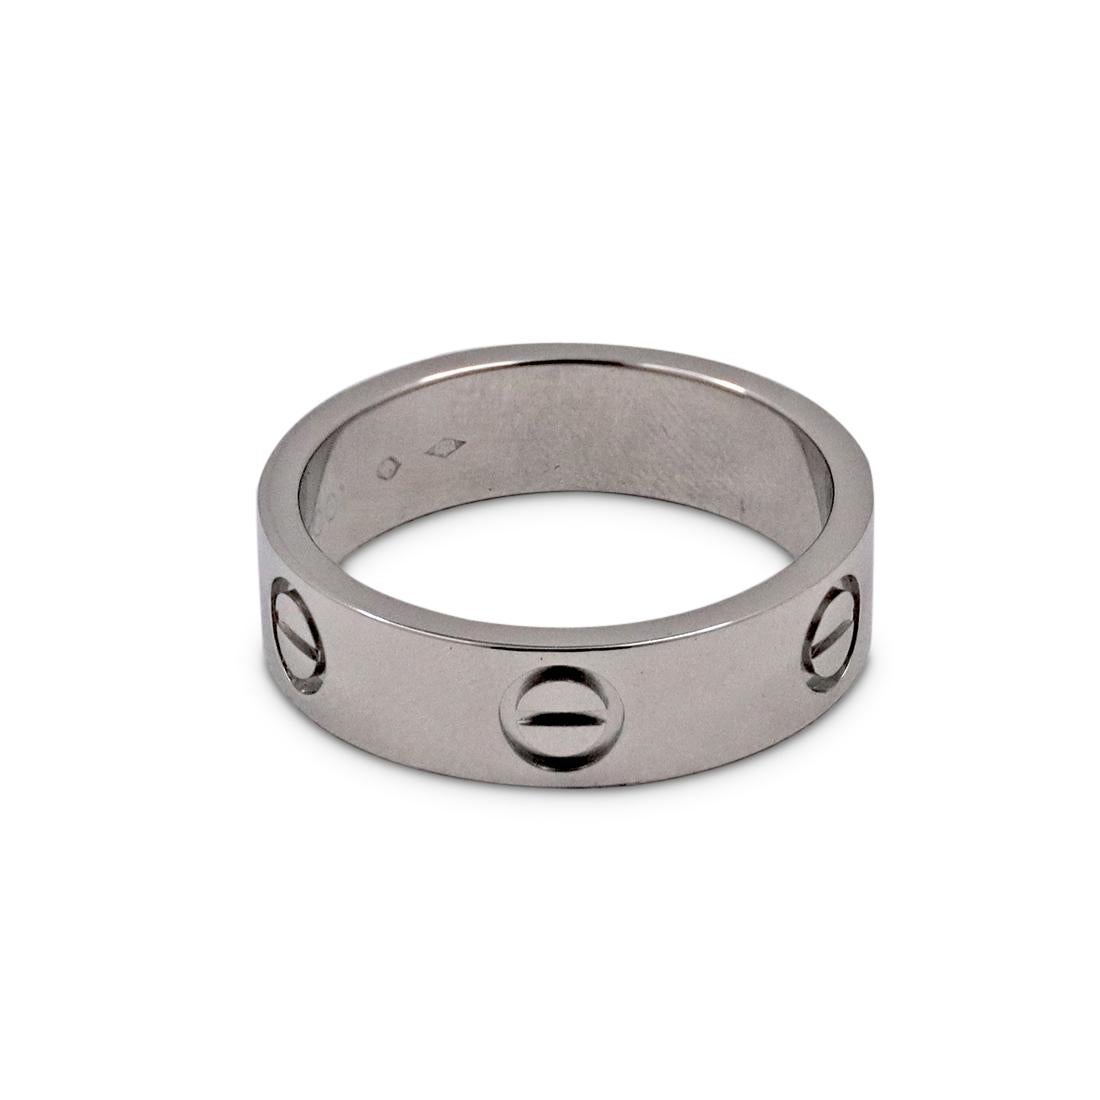 Authentic Cartier 'Love' ring crafted in platinum. Signed Cartier, 950PT, 55, 2001, with serial number and hallmarks. Size 55 (7 1/4 US). The ring is presented with the original box, no papers. CIRCA 2000s.

Brand: Cartier
Collection: Love
Metal: